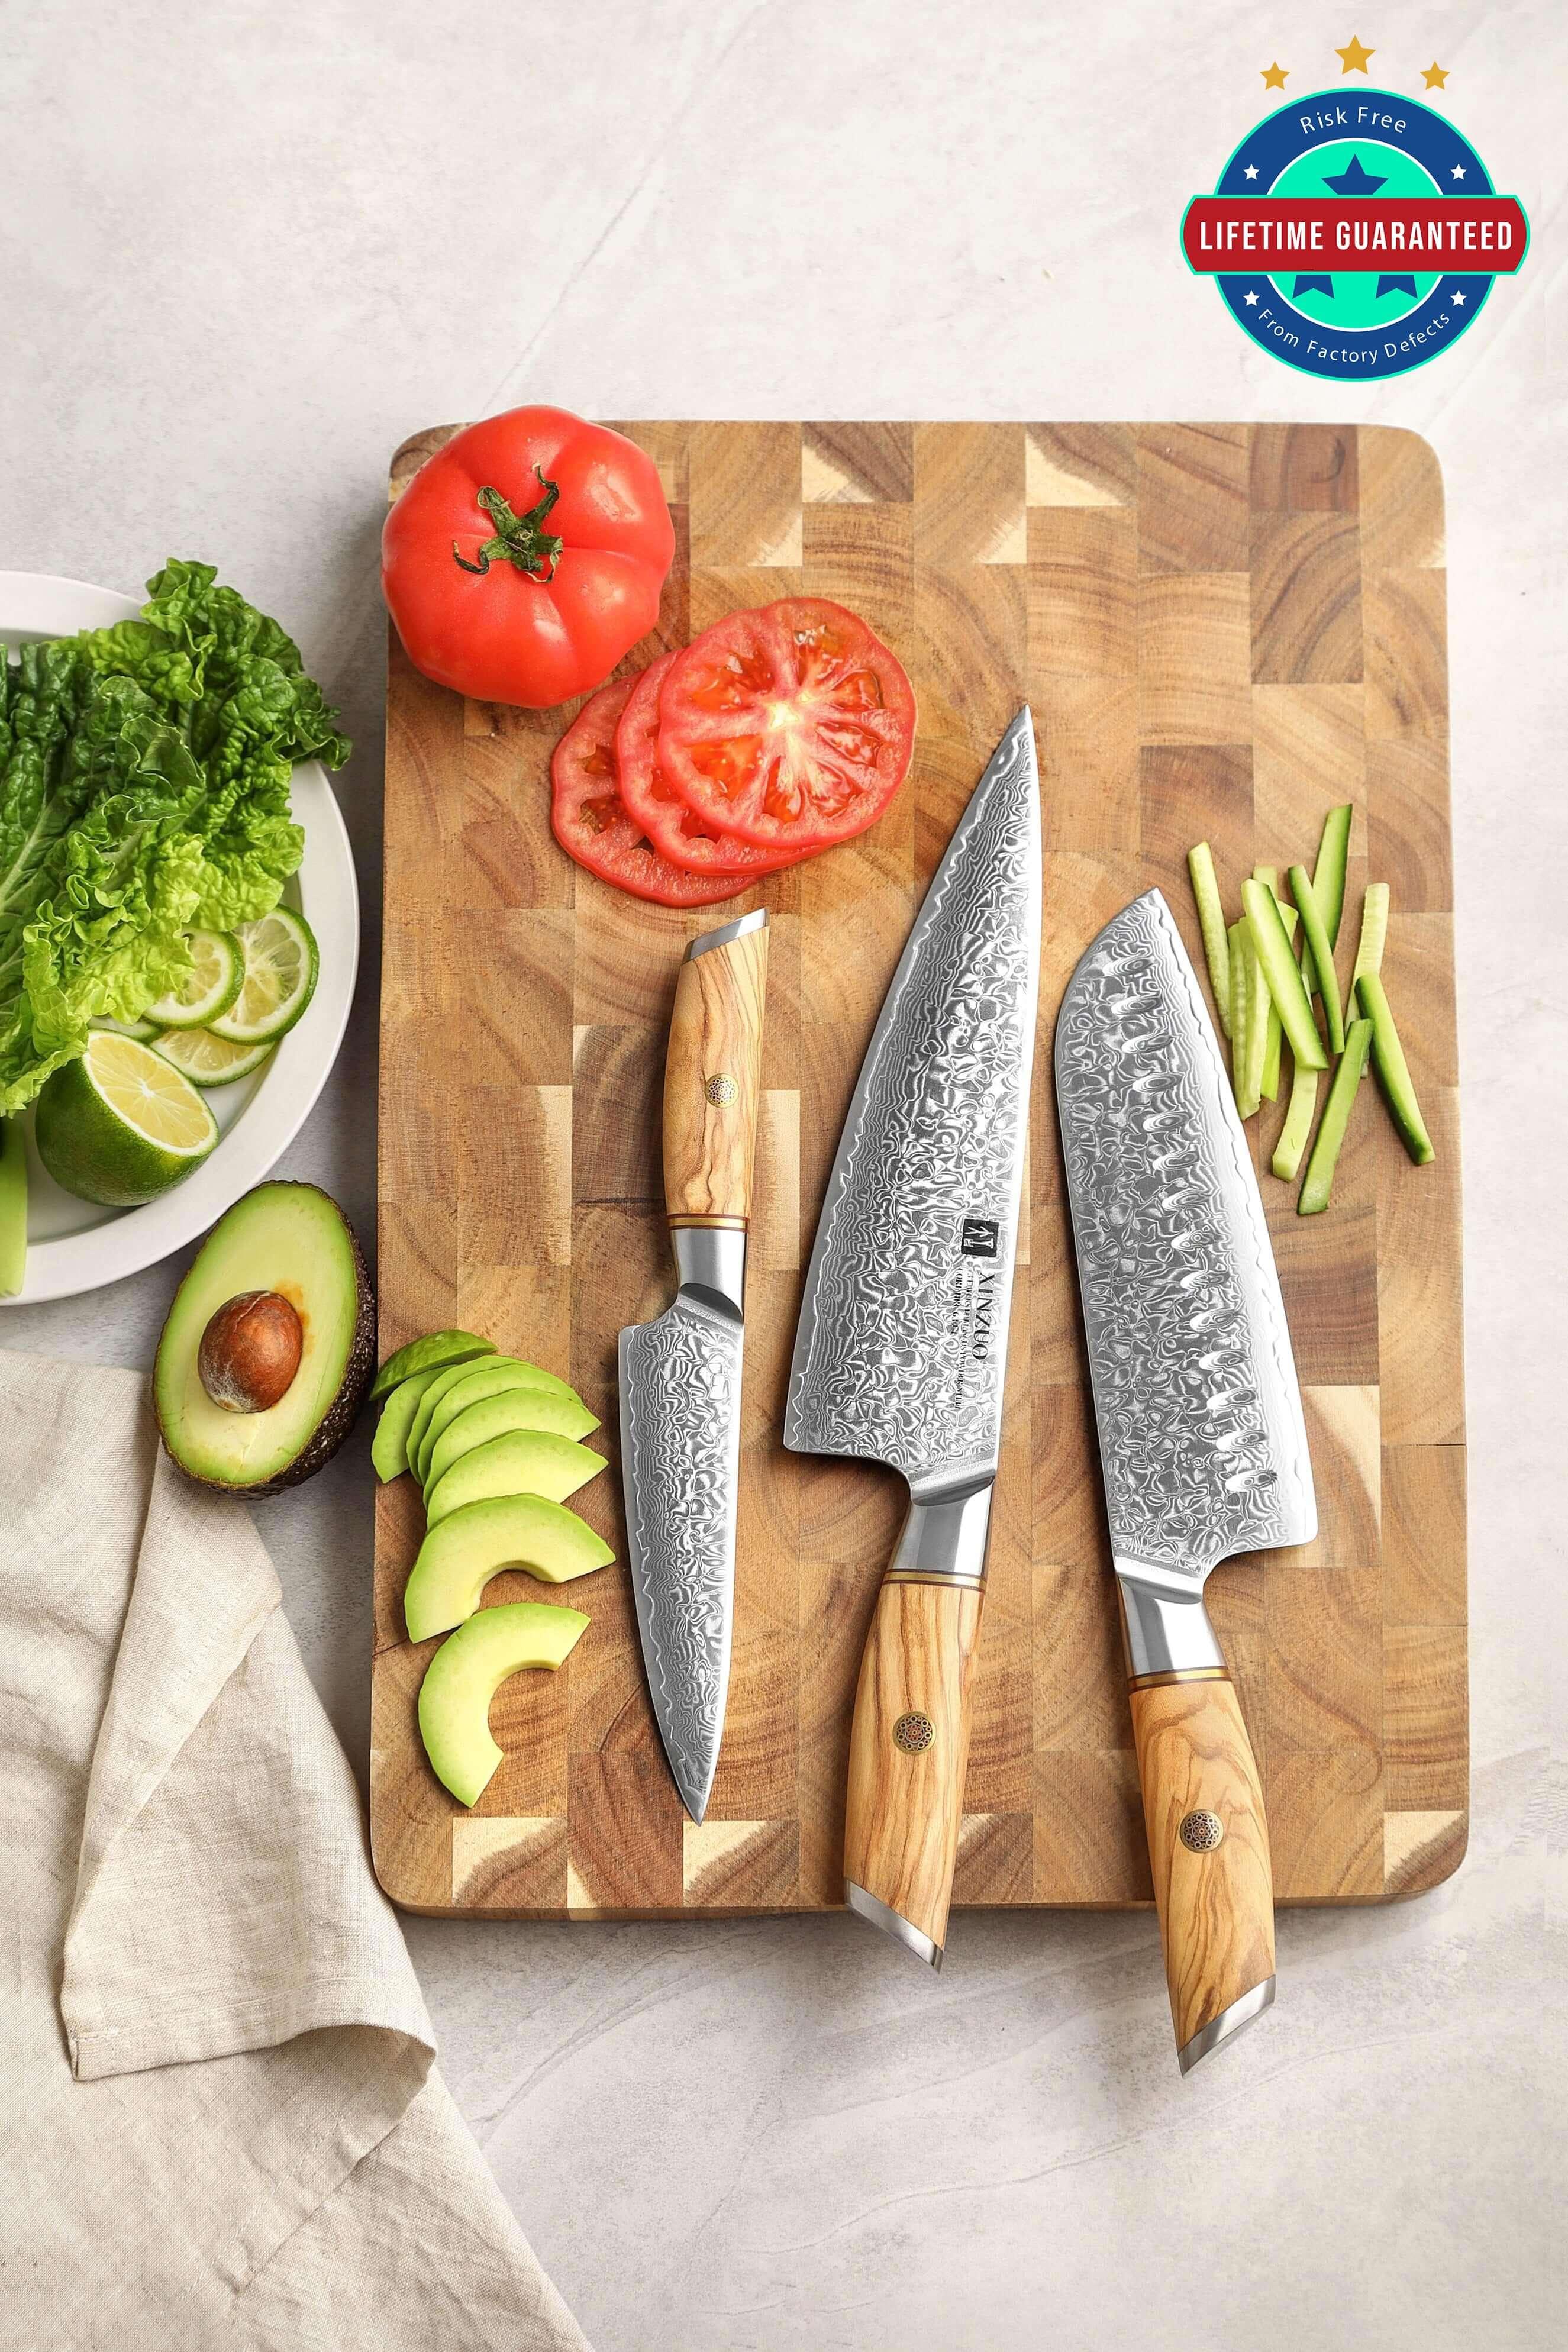  XINZUO 7PC Kitchen Knife Set with Block Wooden